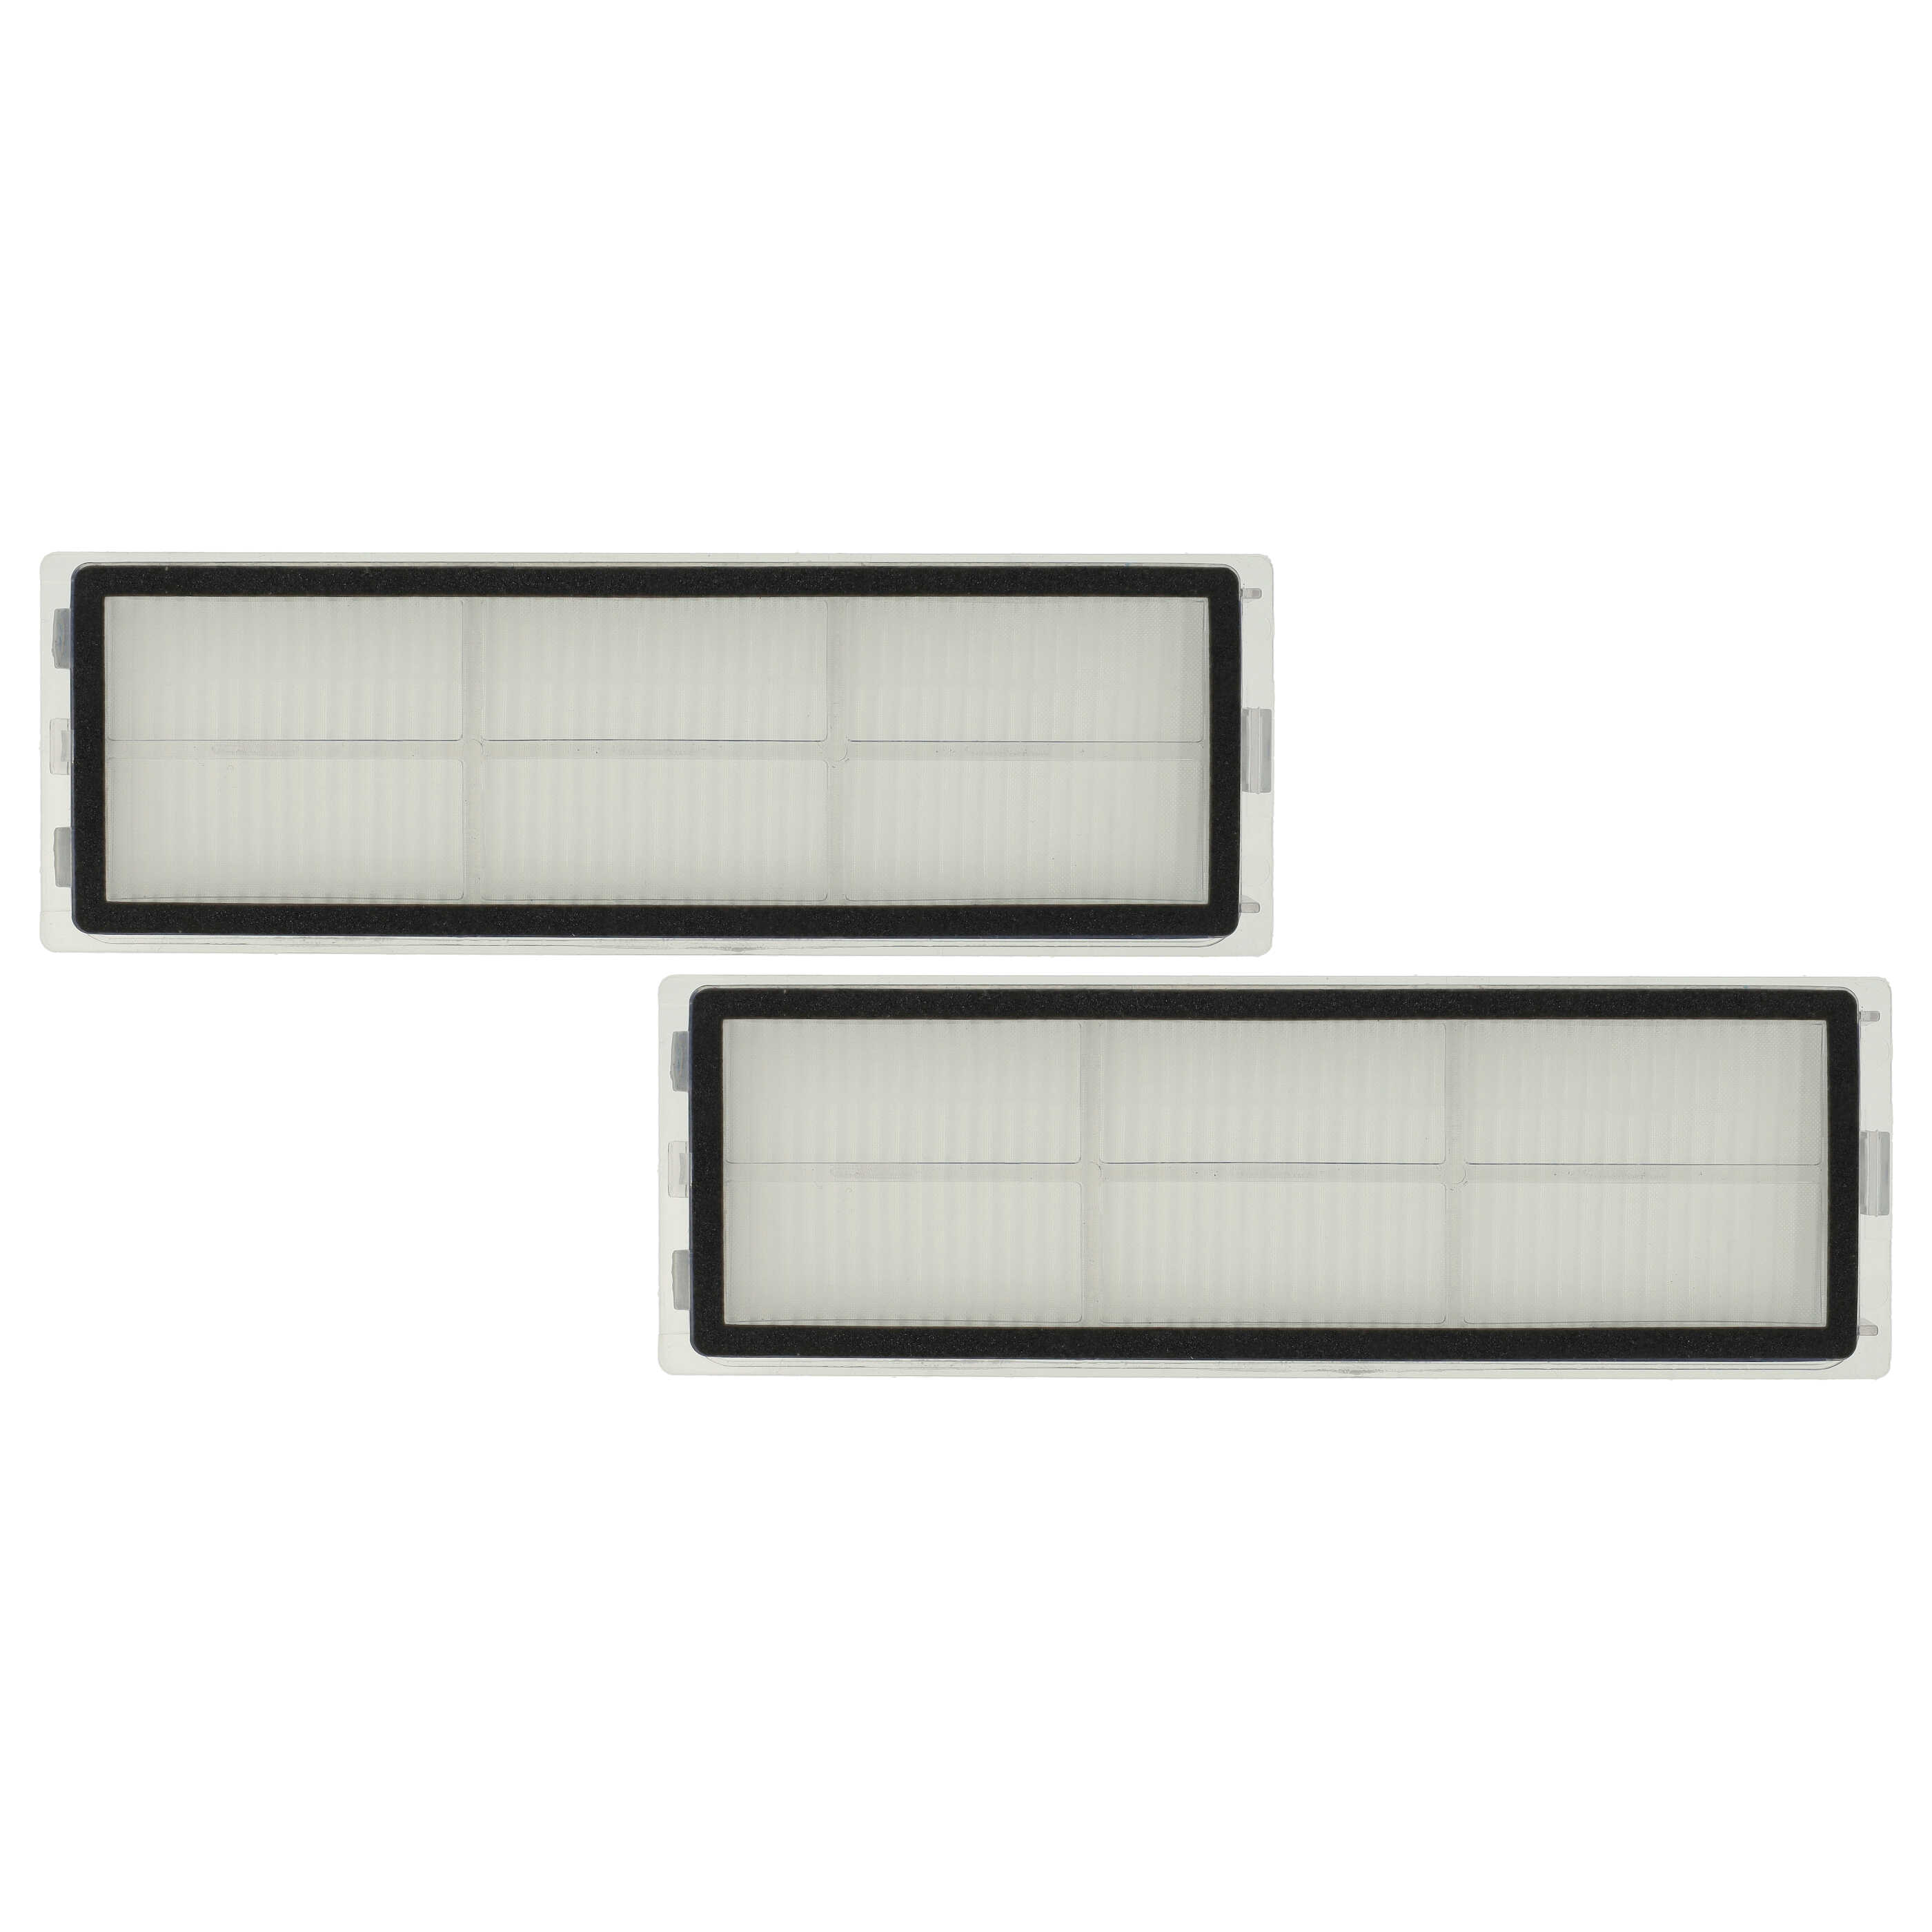 2x HEPA Filter + Frame suitable for D9 Dreame, Xiaomi D9 Robot Cleaner - 15 x 5 x 1.4 cm